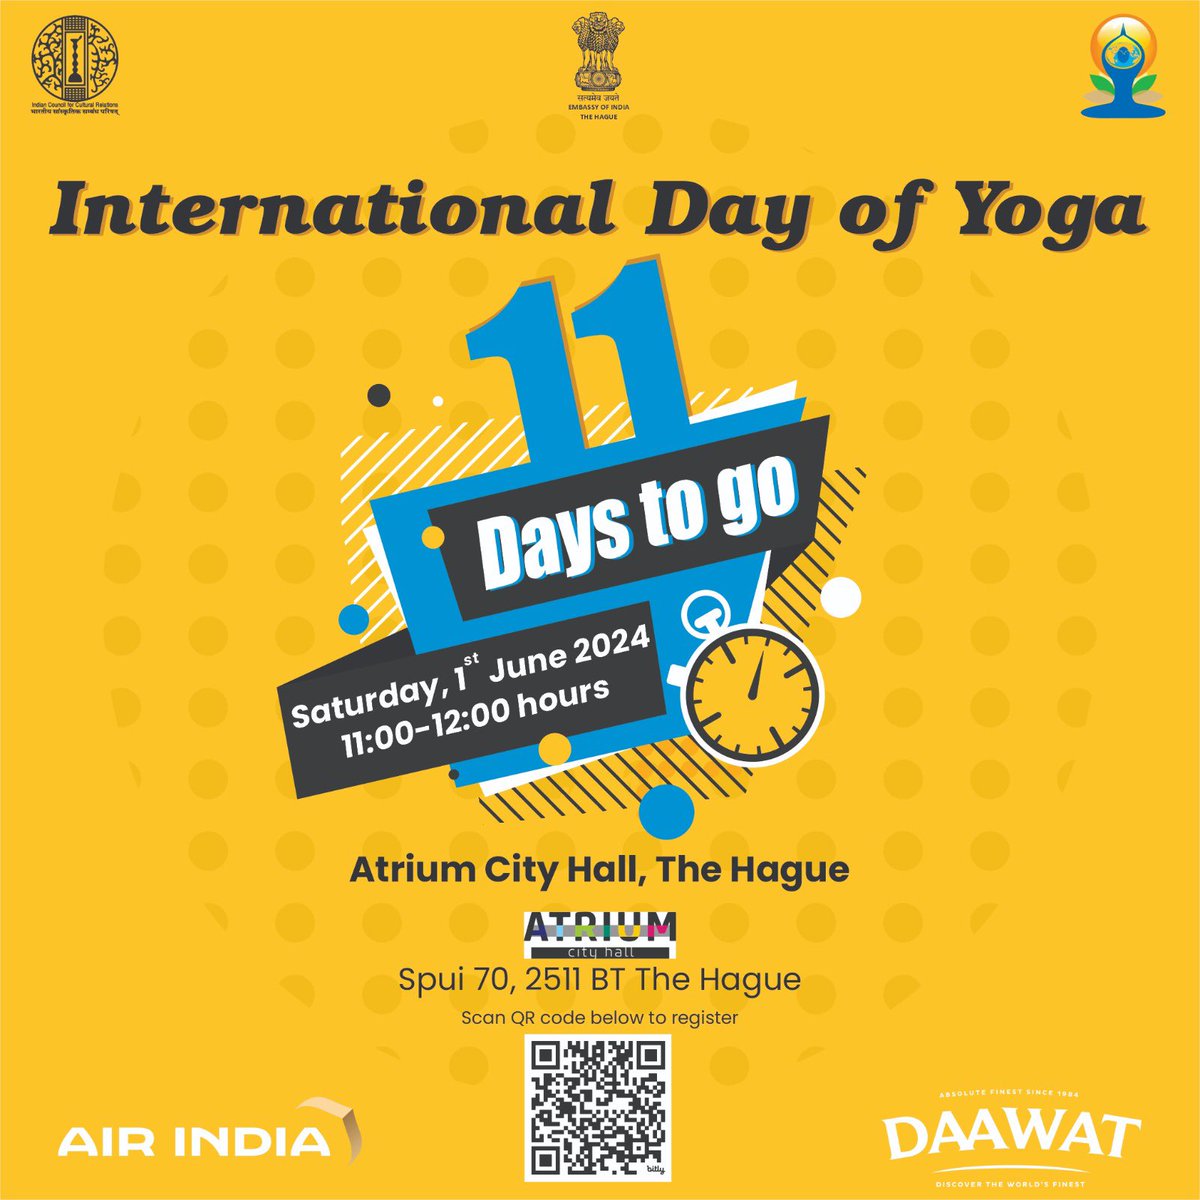 Let's celebrate our journey towards a healthy mind & a healthy body. Join us for the 10th #InternationalDayofYoga2024 on Saturday, 1st June @AtriumCityHall @GemeenteDenHaag #countdown We encourage to carry your own yoga mat. Register @ bit.ly/4b7fWIY or scan QR code👇